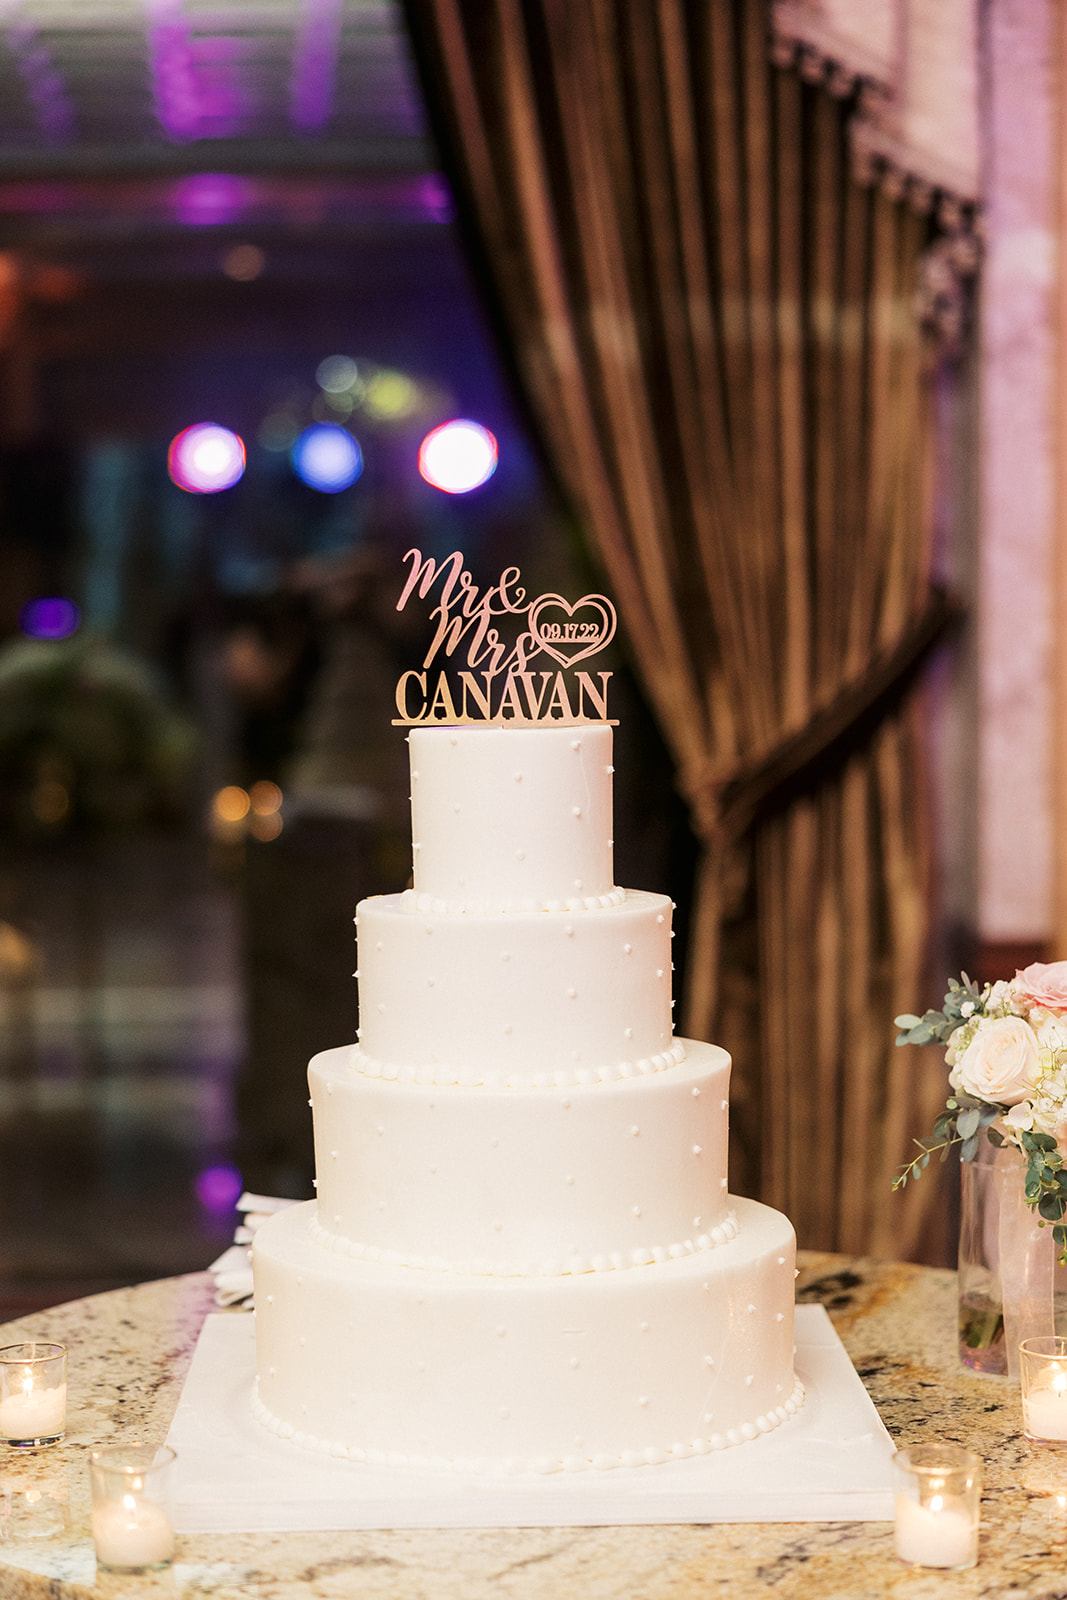 A four tier cake sits on a granite table with custom topper